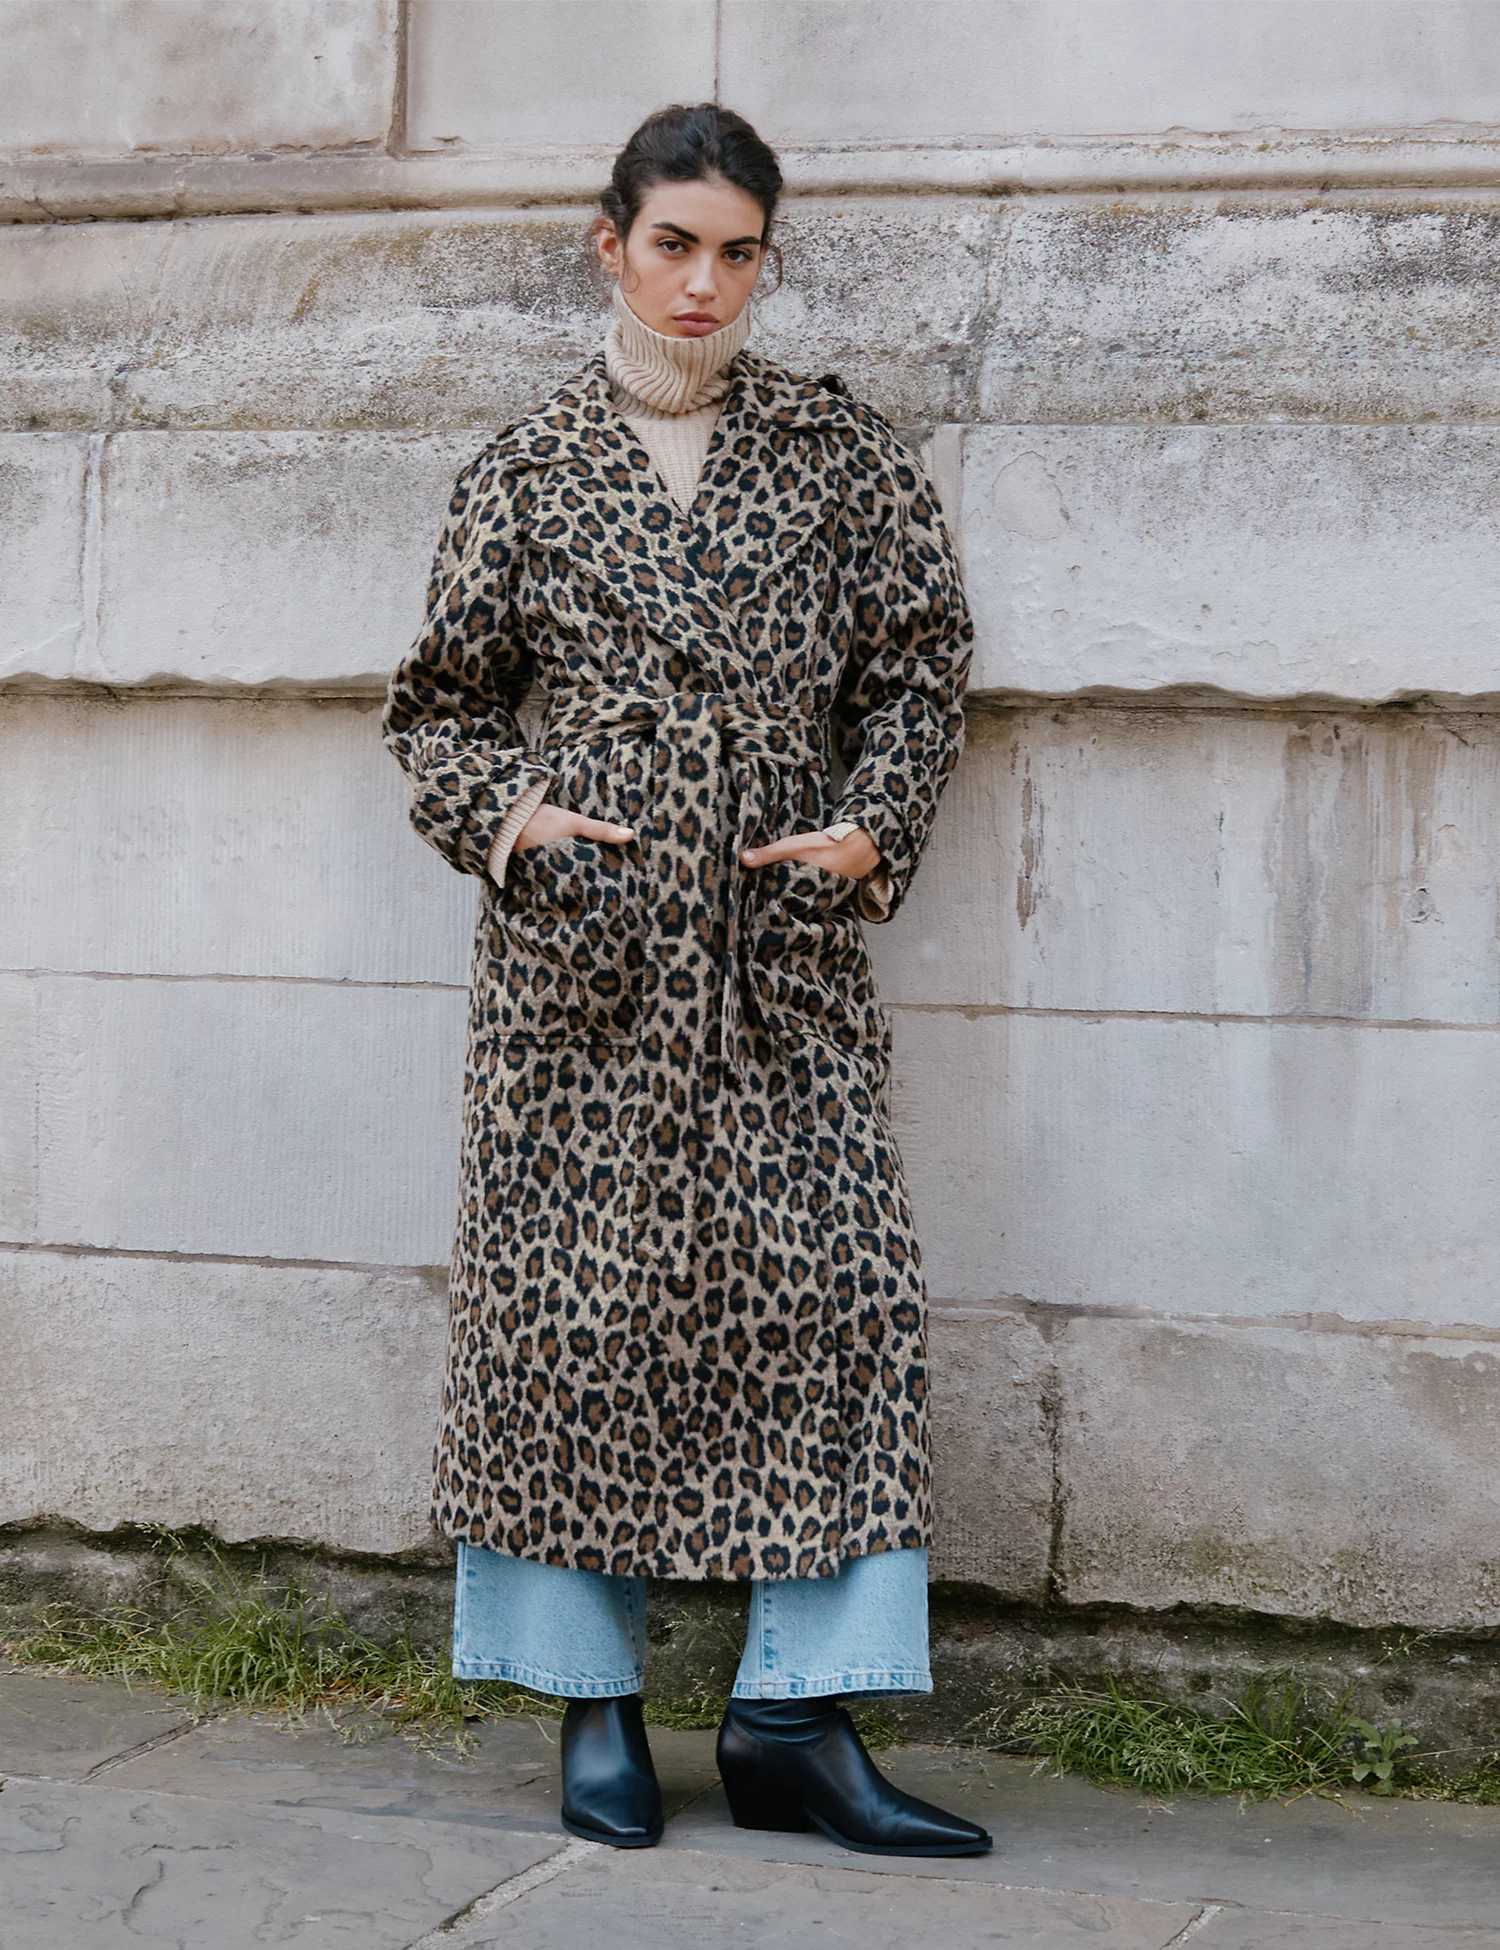 This bold leopard print trench coat from Albaray is made with a touch of wool in the fabric for extra warmth. It's cut in a smart tailored fit, with sleeve loops for added polish and an oversized revere collar. A tie belt pulls you in at the waist, while patch pockets on the front provide handy storage.